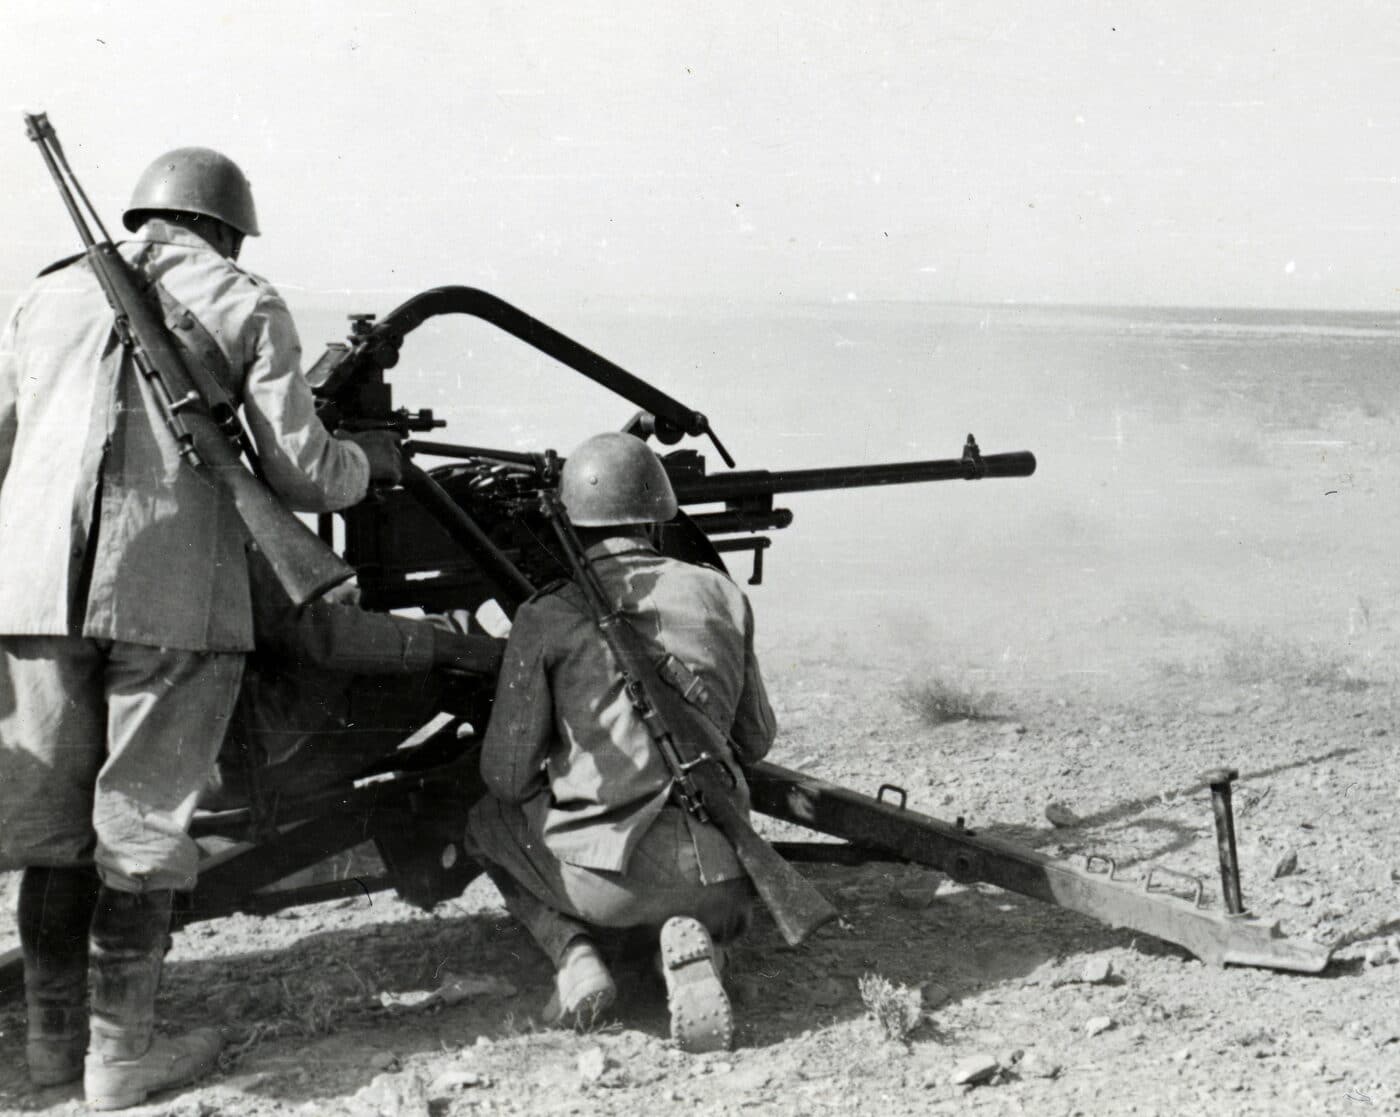 Italian Carcano carbines on soldiers backs while they are firing a Breda 20mm in North Africa